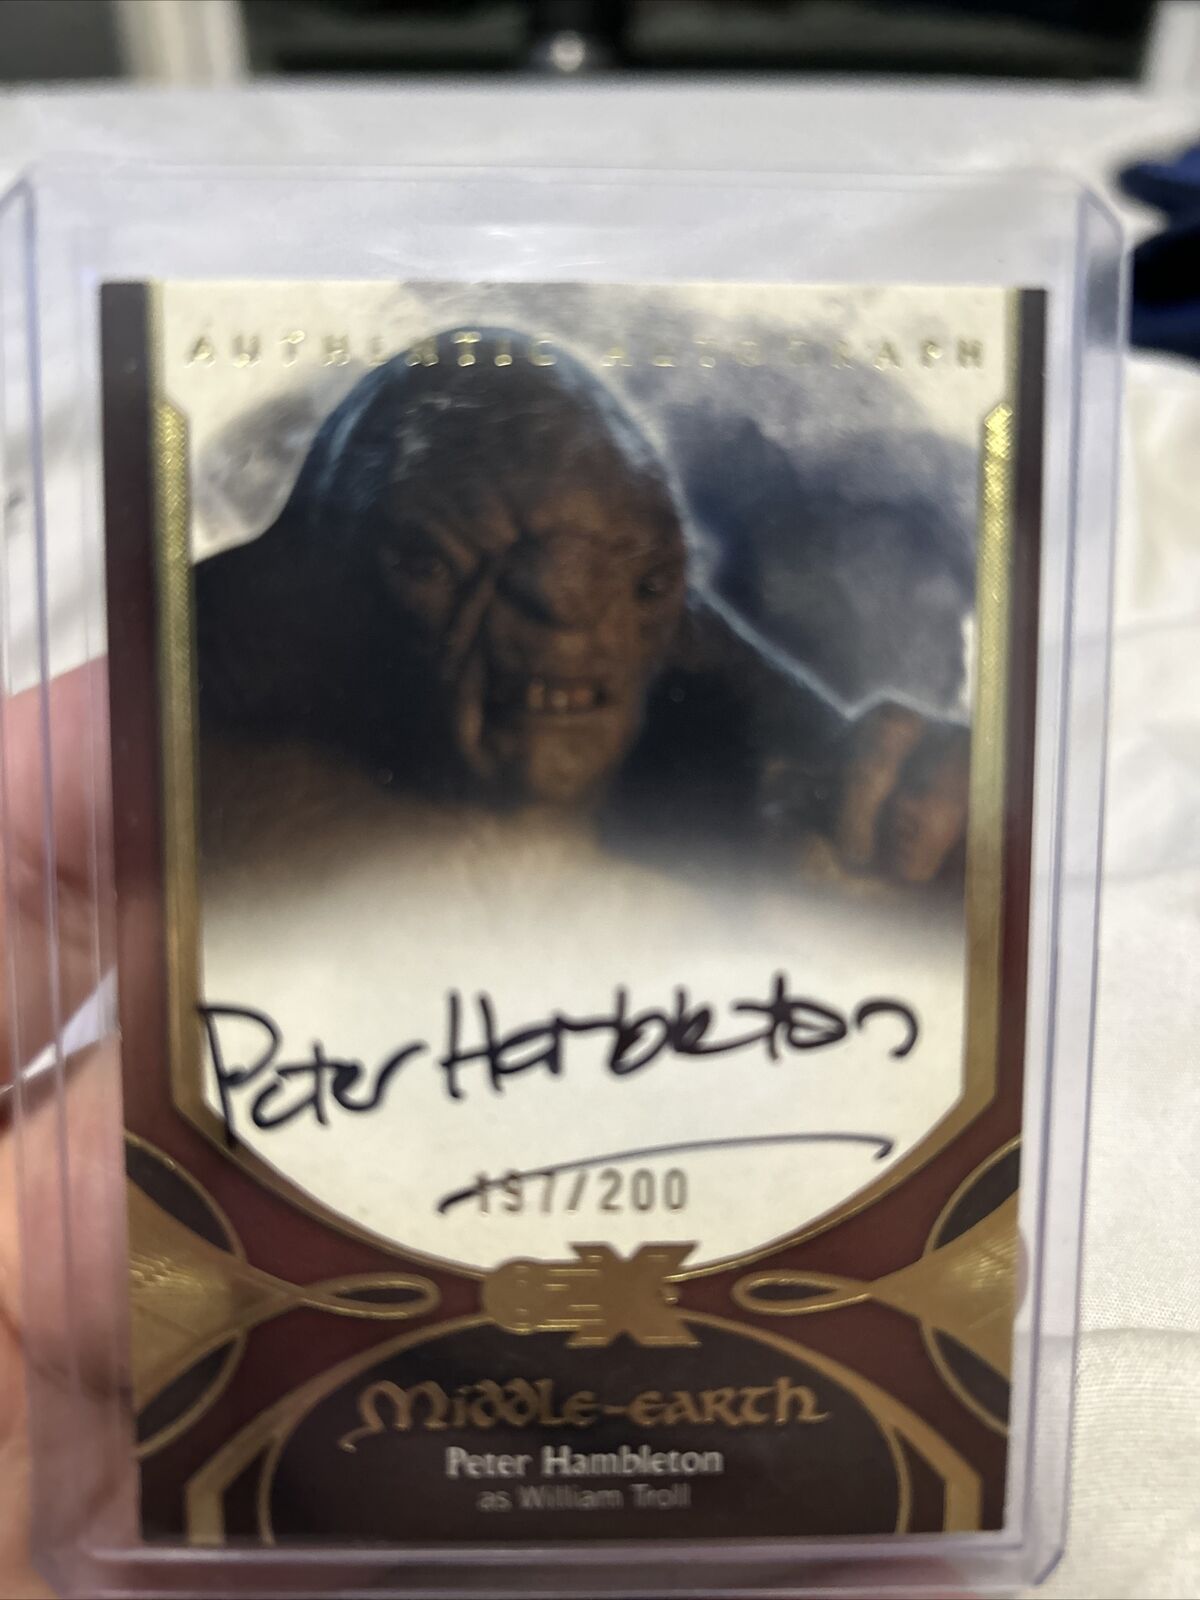 Cryptozoic CZX Middle Earth Peter Hambleton AUTO #197/200signed William Troll